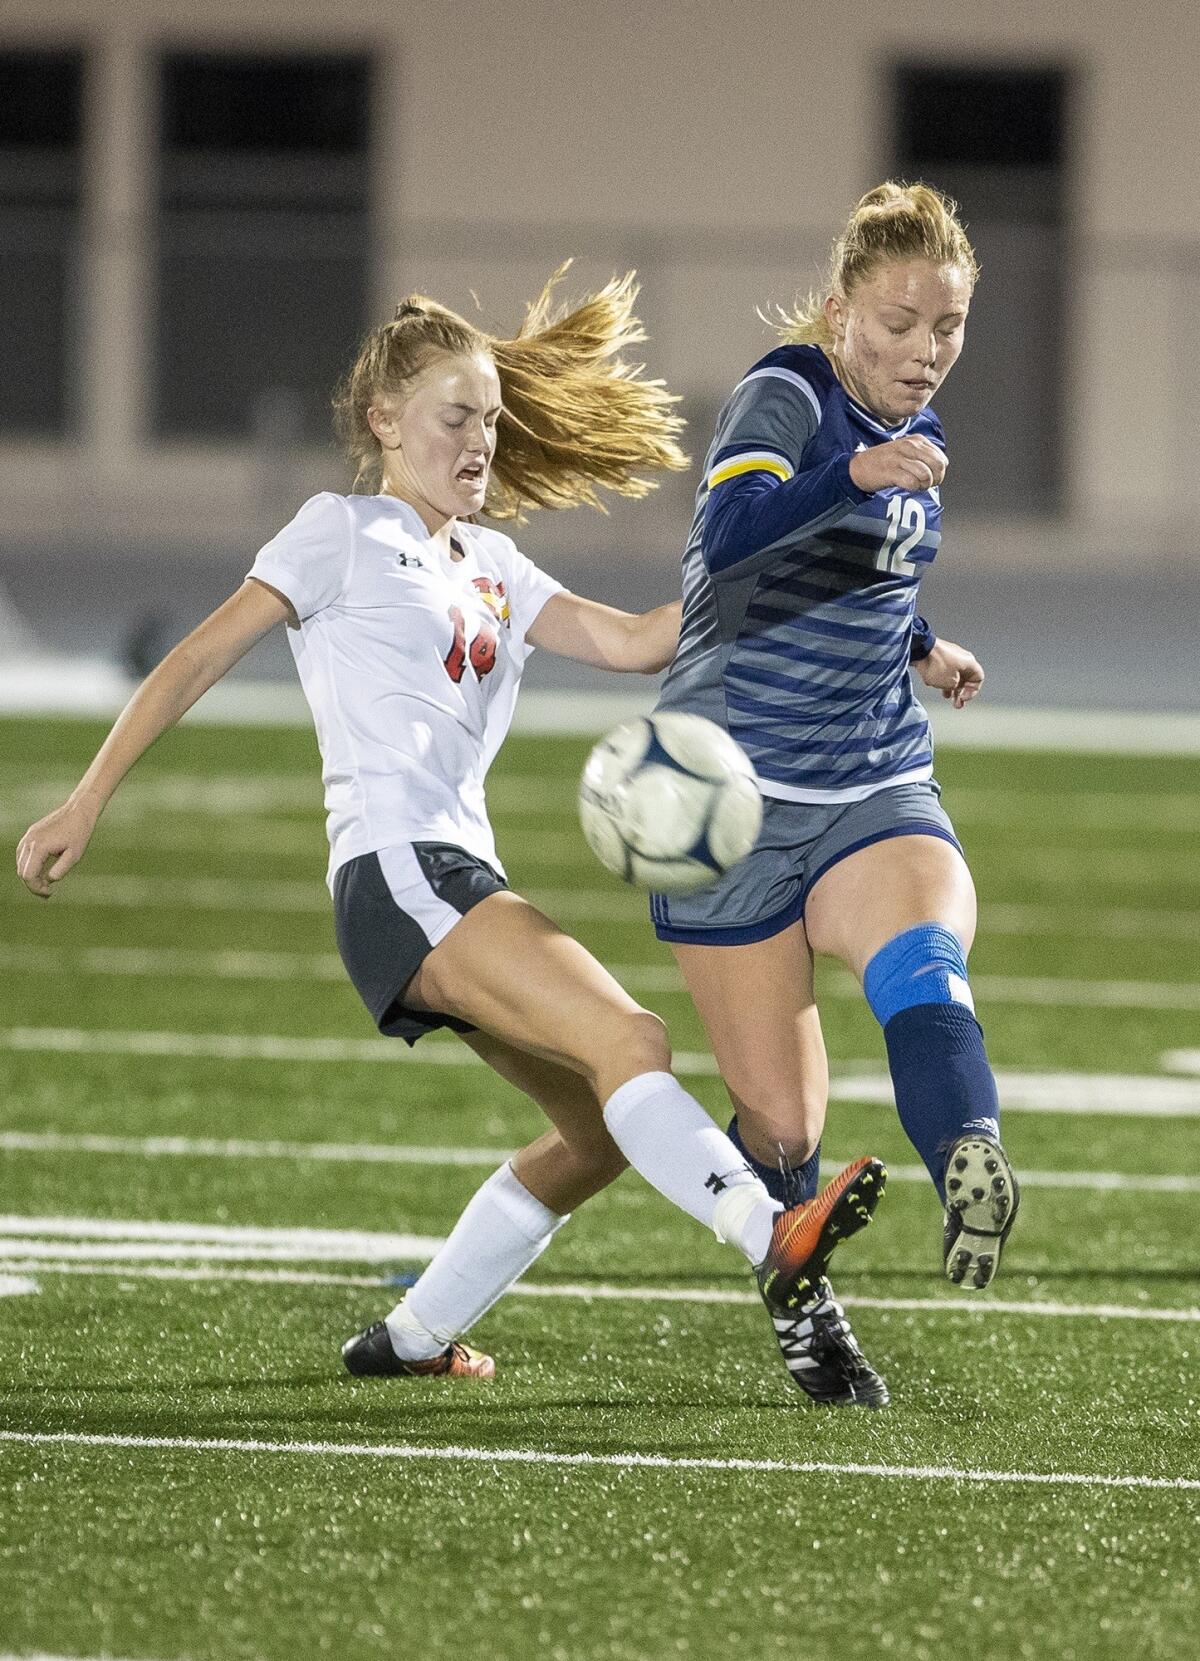 Newport Harbor's Emily Johnson, right, and Mission Viejo's Isabel McAteer battle for a ball in the first round of the CIF Southern Section Division 1 playoffs at Davidson Field on Feb. 6.